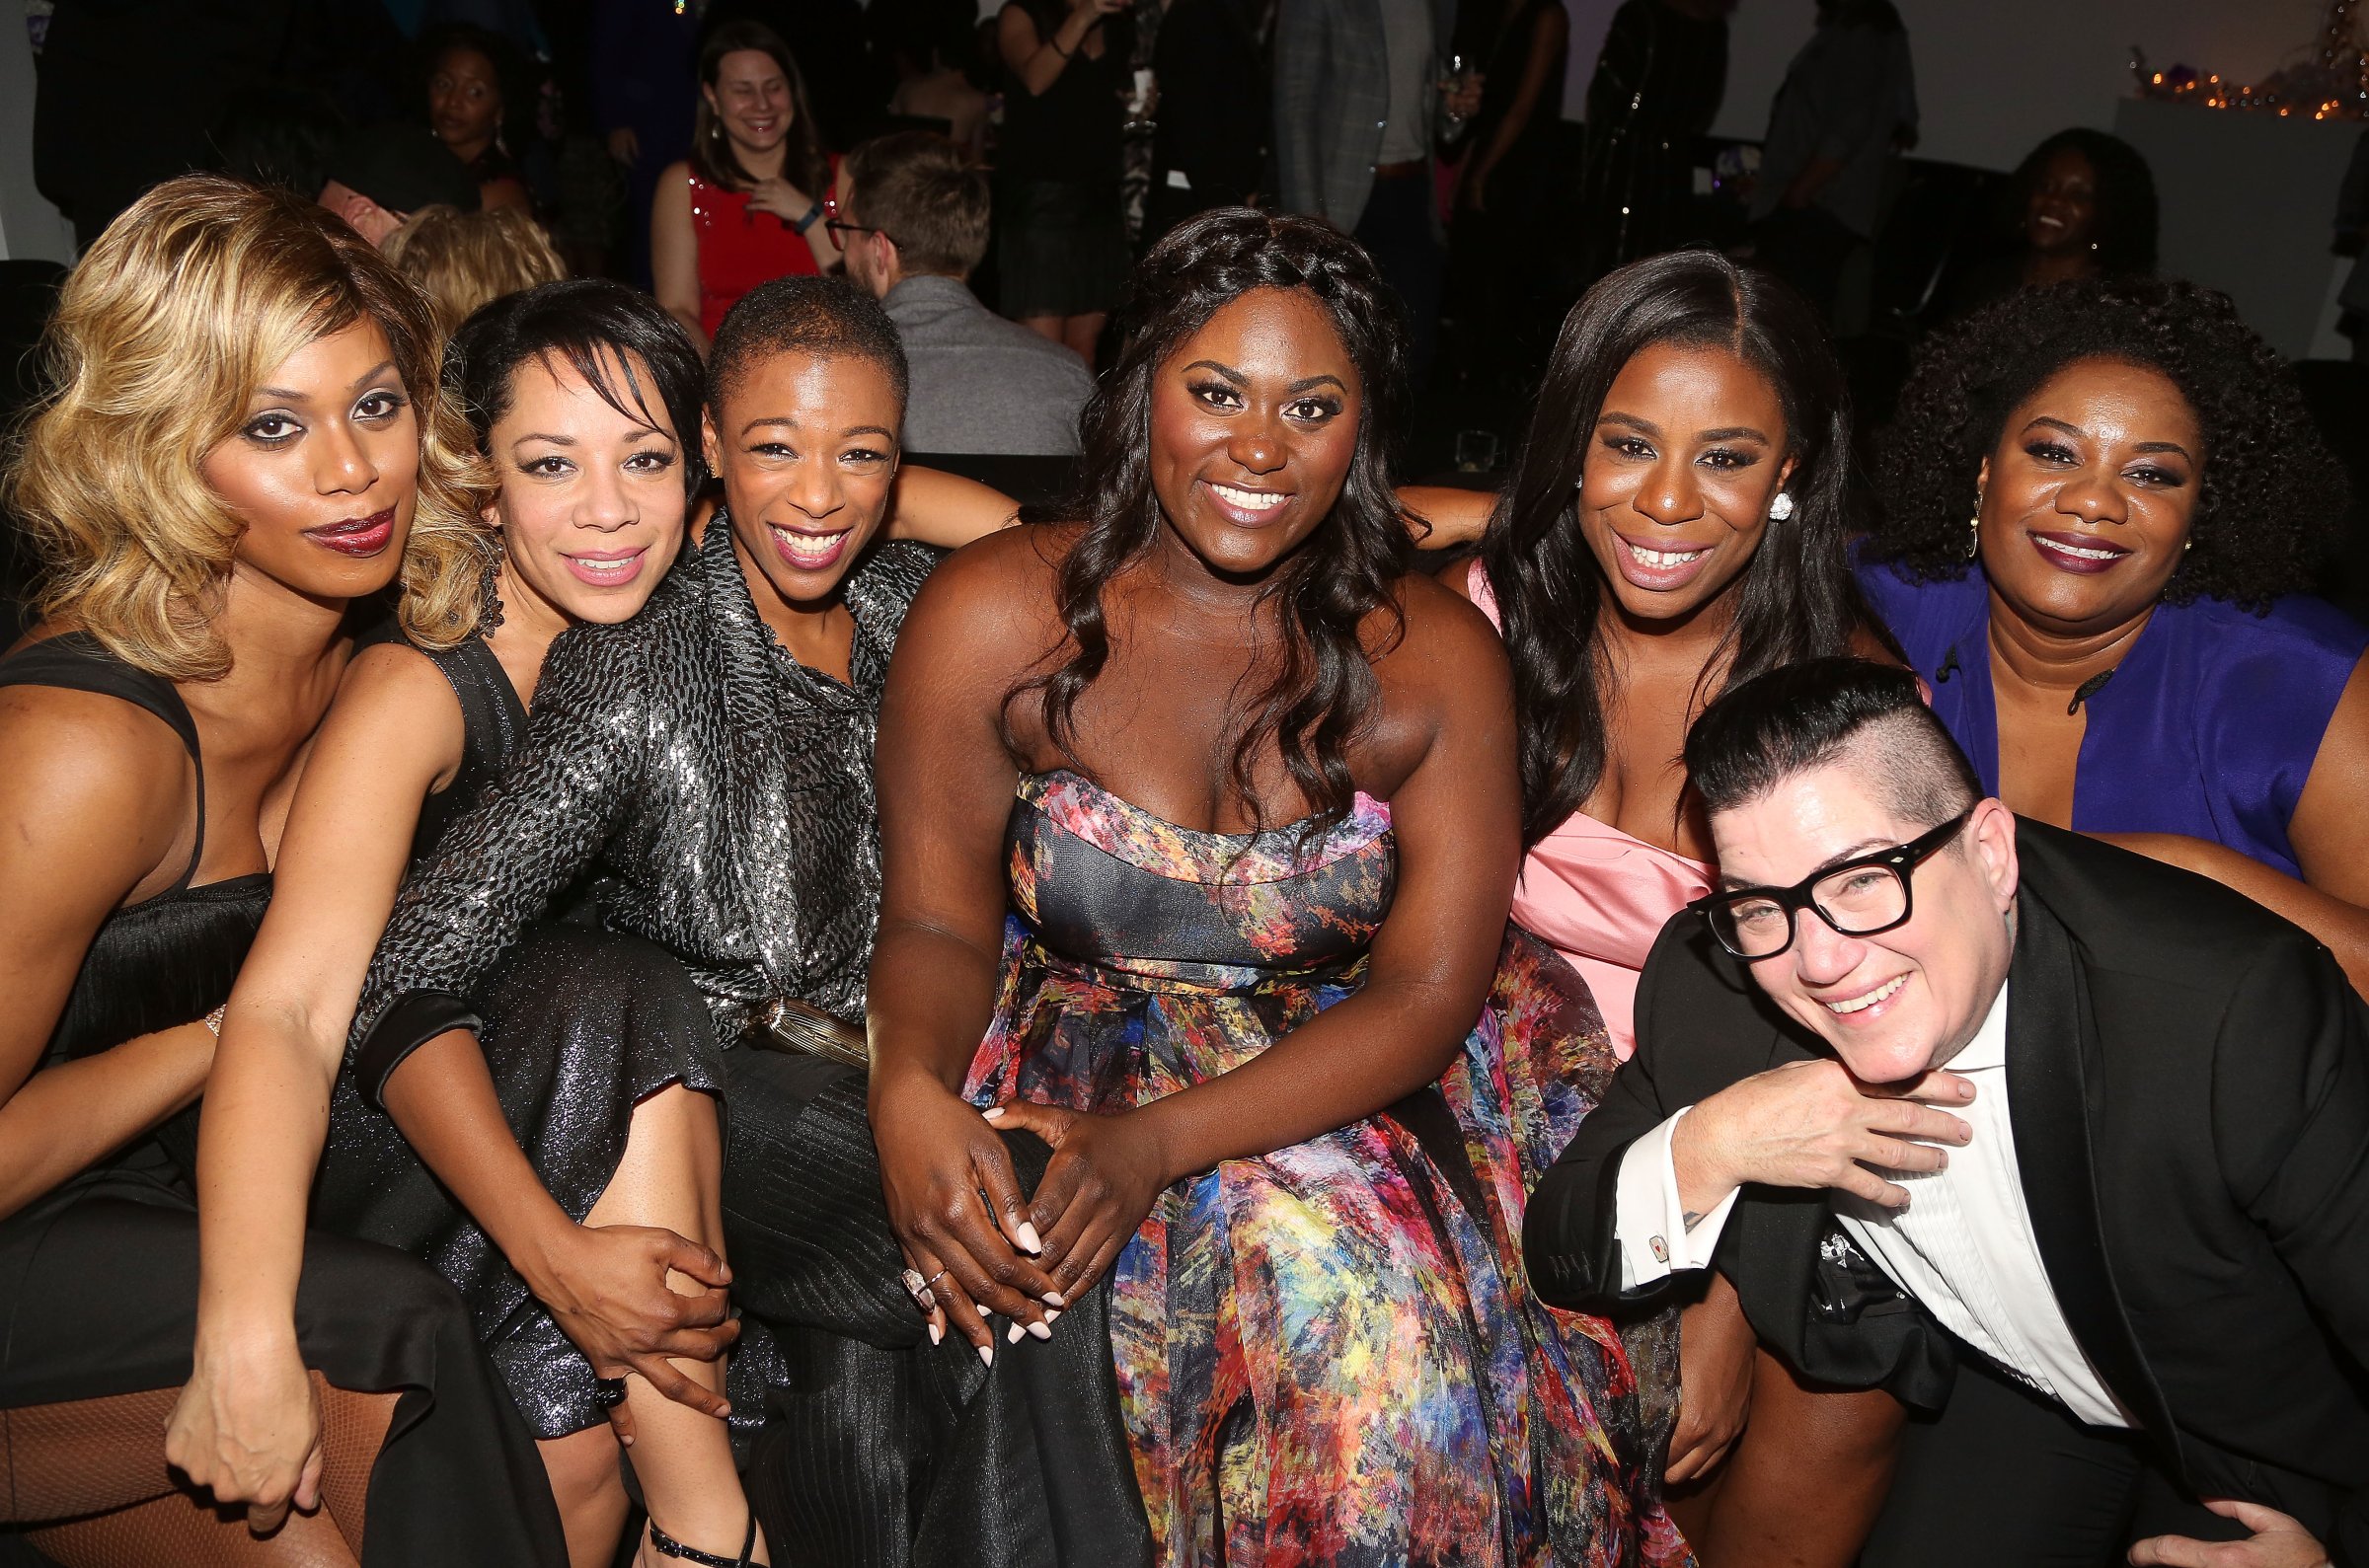 (L-R)'Orange is The New Black' stars Laverne Cox, Selenis Leyva, Samira Wiley, Danielle Brooks, Uzo Aduba, Lea DeLaria and Adrienne Moore pose at the opening night after party for 'The Color Purple' on Broadway on Dec. 10, 2015 in New York City.